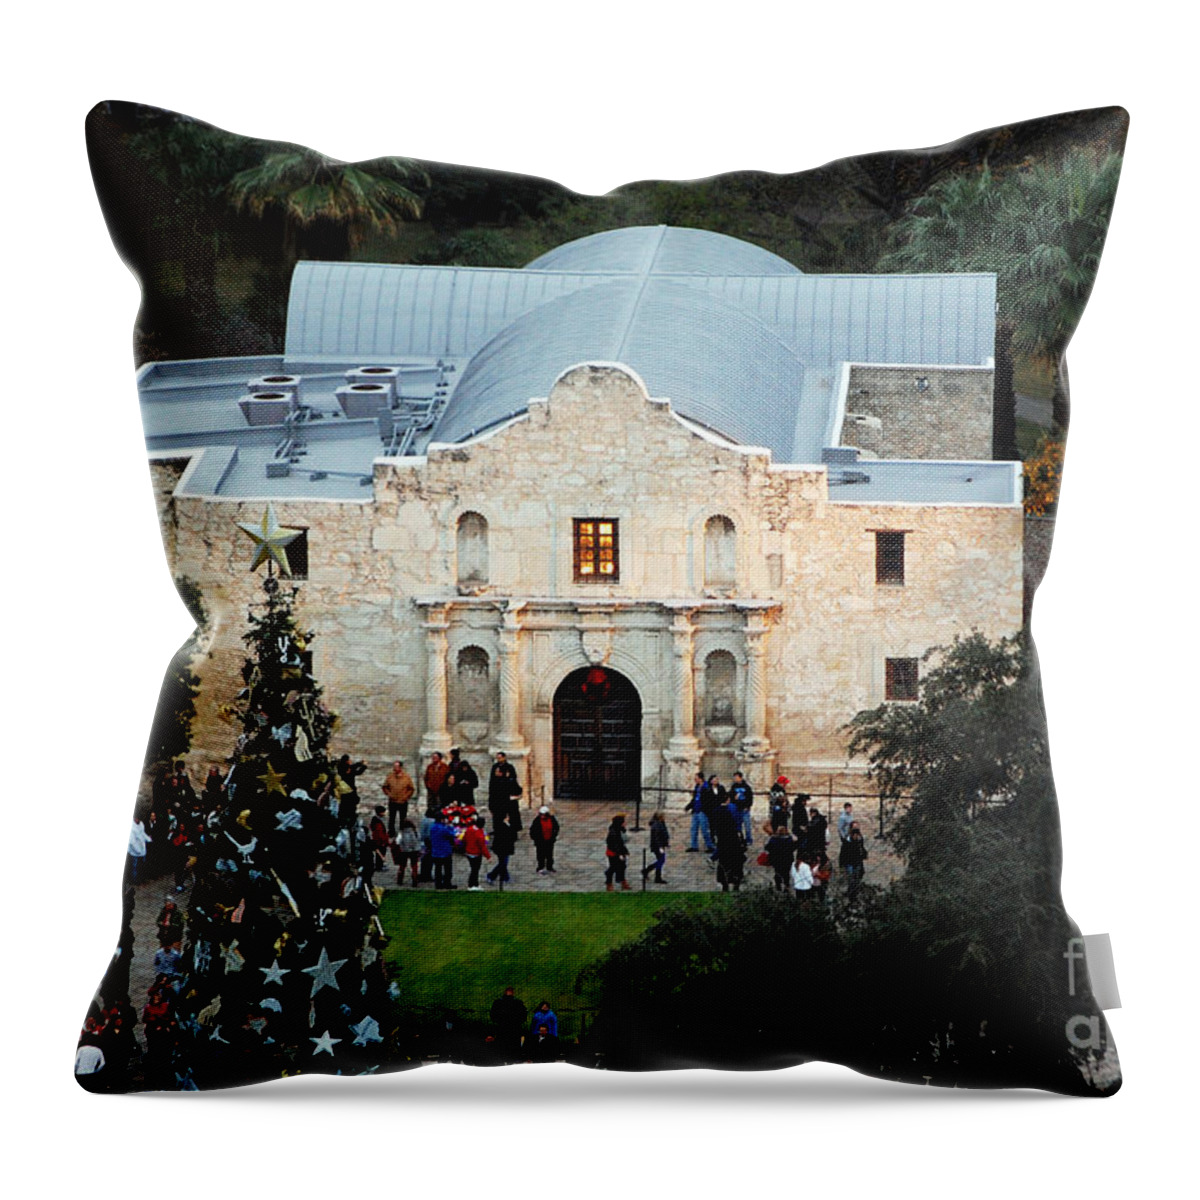 Alamo Throw Pillow featuring the photograph Alamo Entrance High Angle View at Christmas in San Antonio Texas by Shawn O'Brien